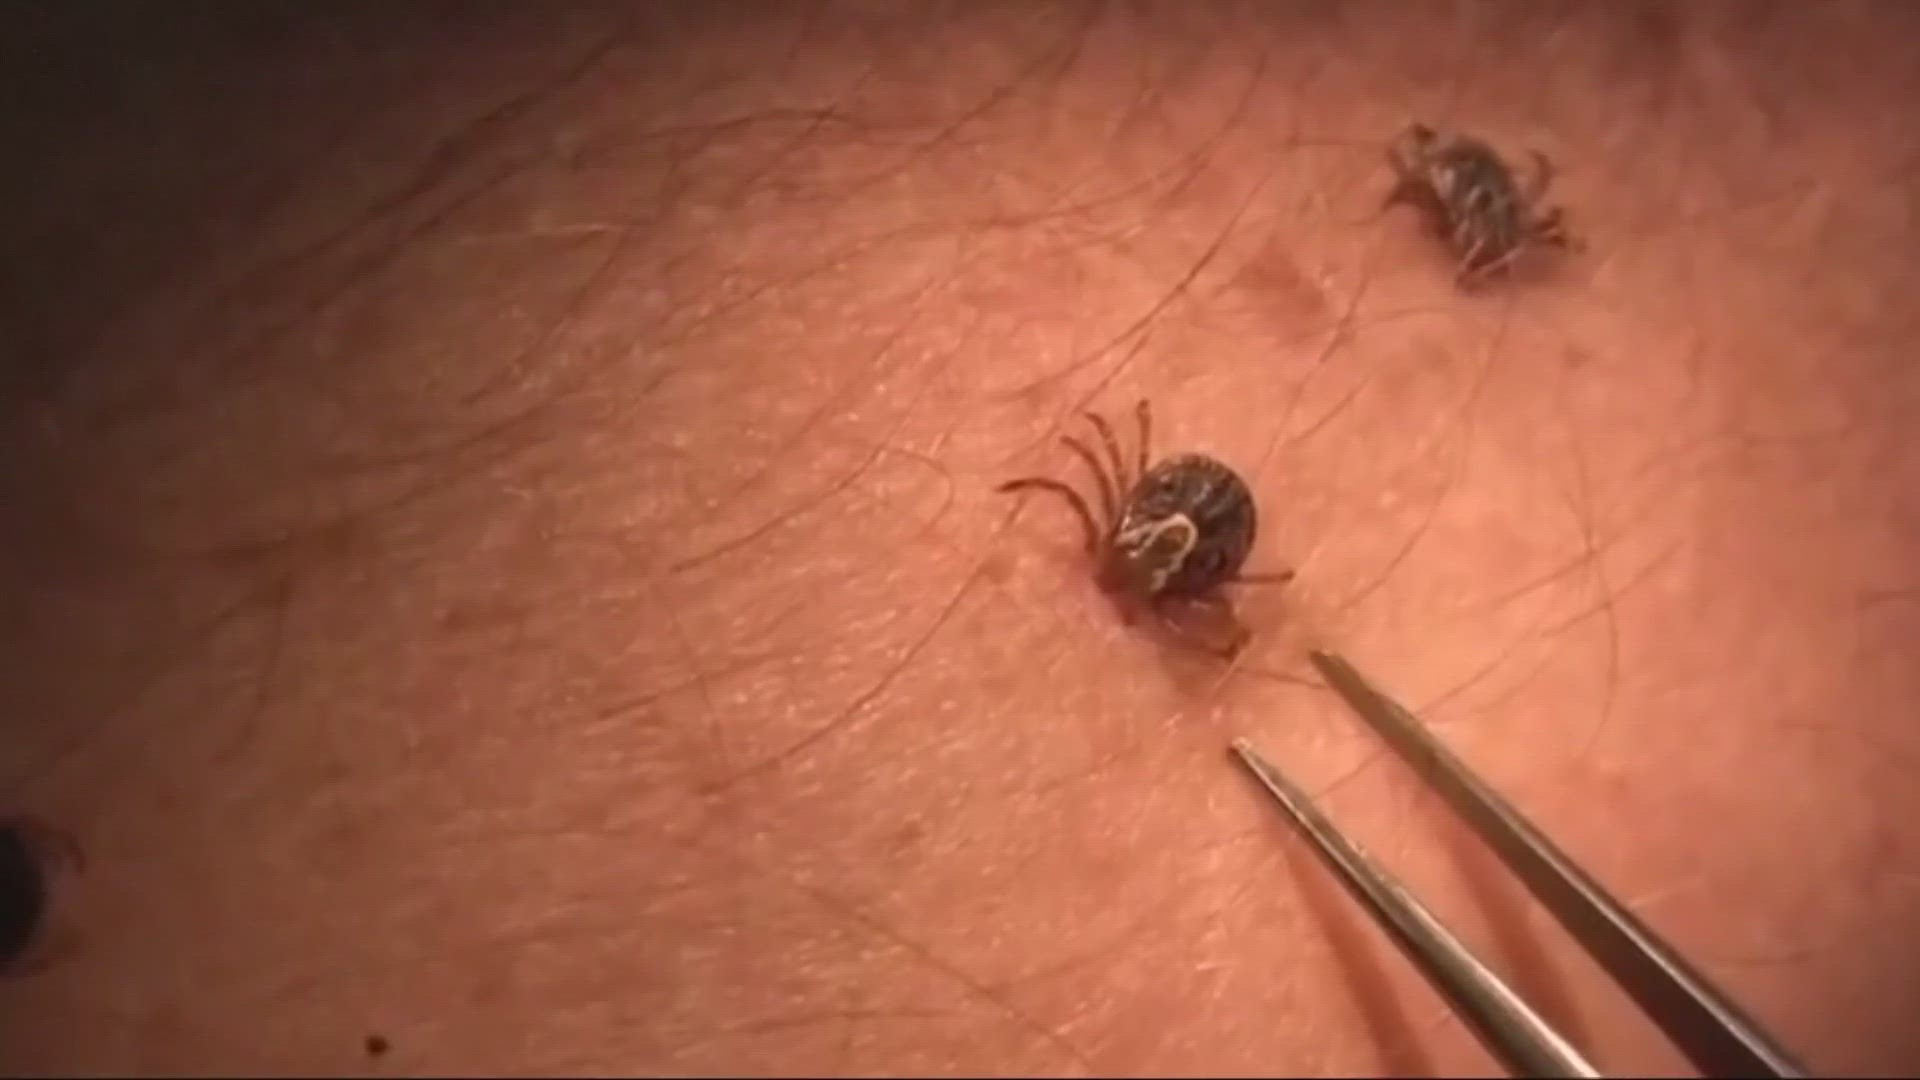 We get some expert advice on how to keep you and your pets safe during tick season here in Northeast Ohio.